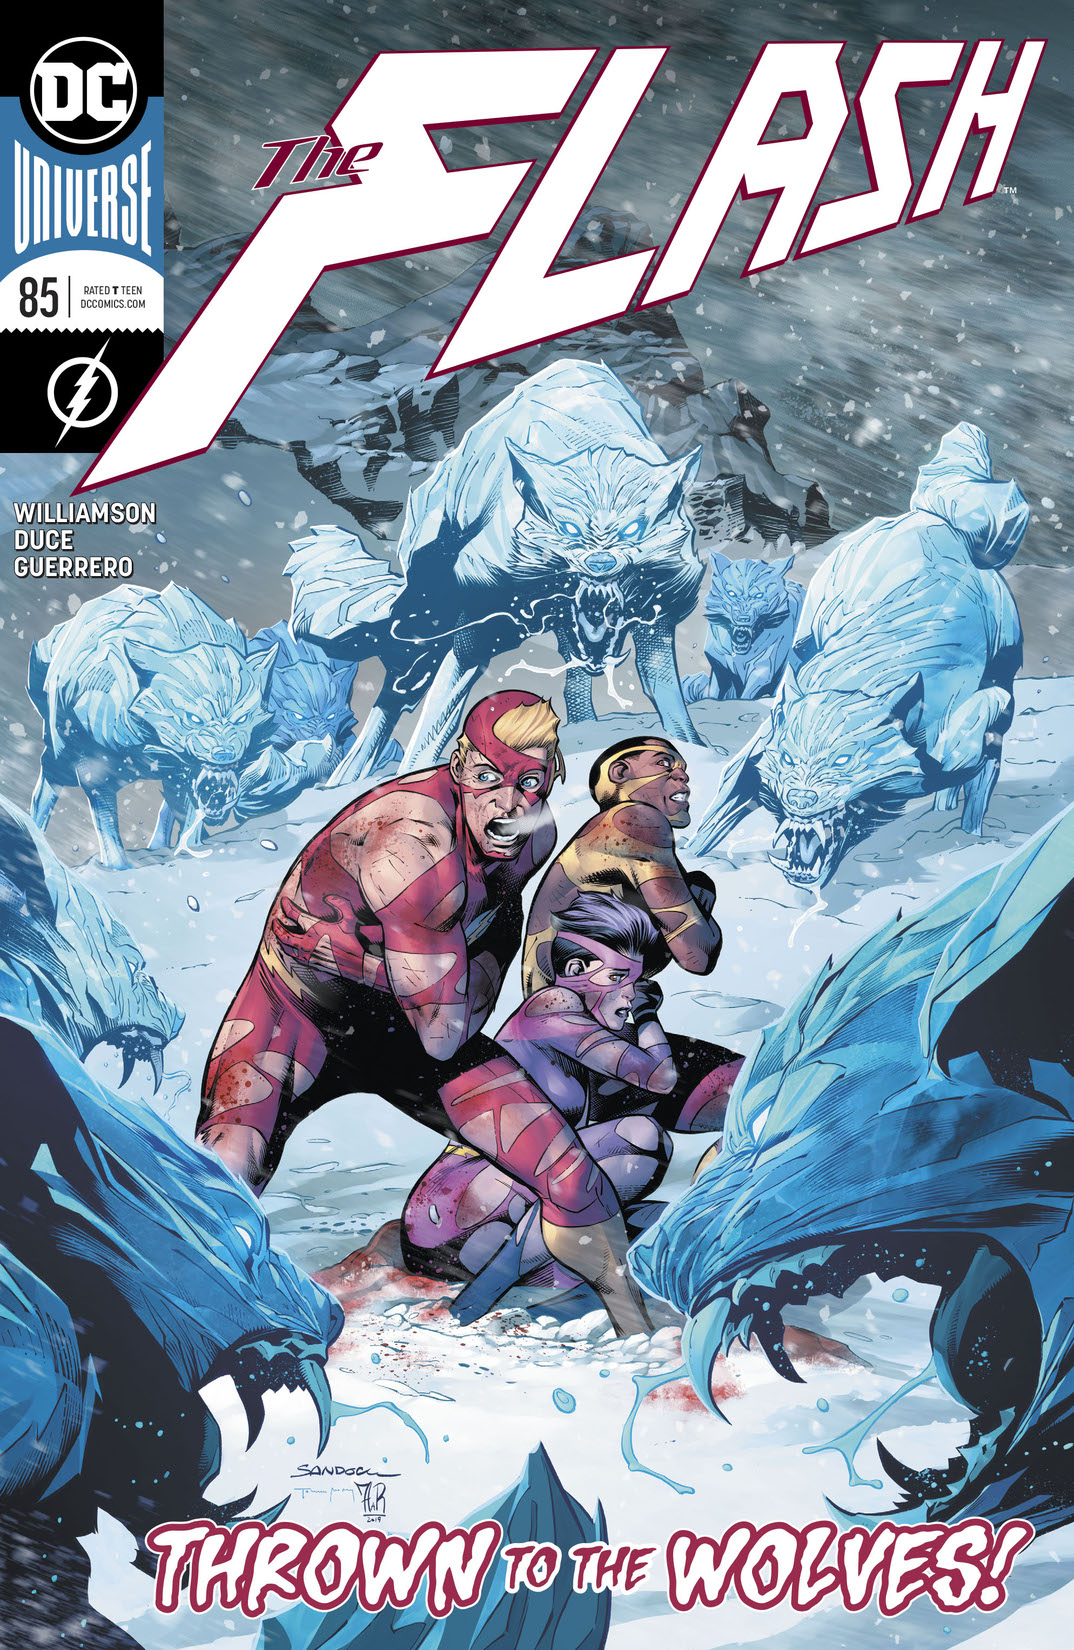 The Flash (2016-) #85 preview images